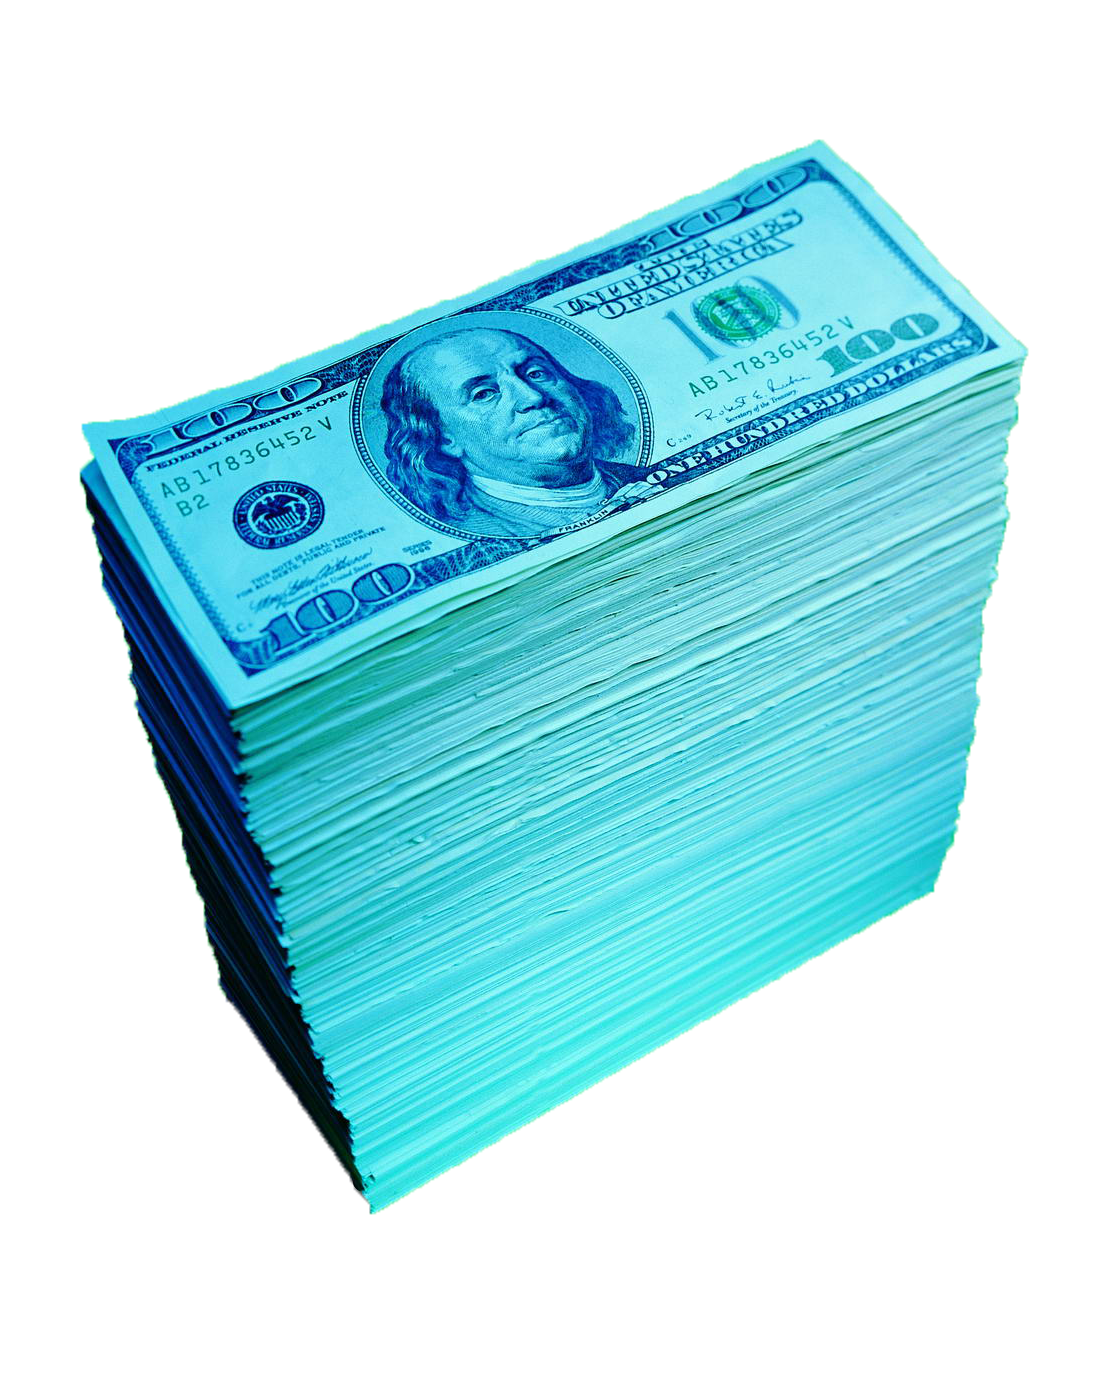 Money United States Dollar Bank Gift Currency - Stack of foreign